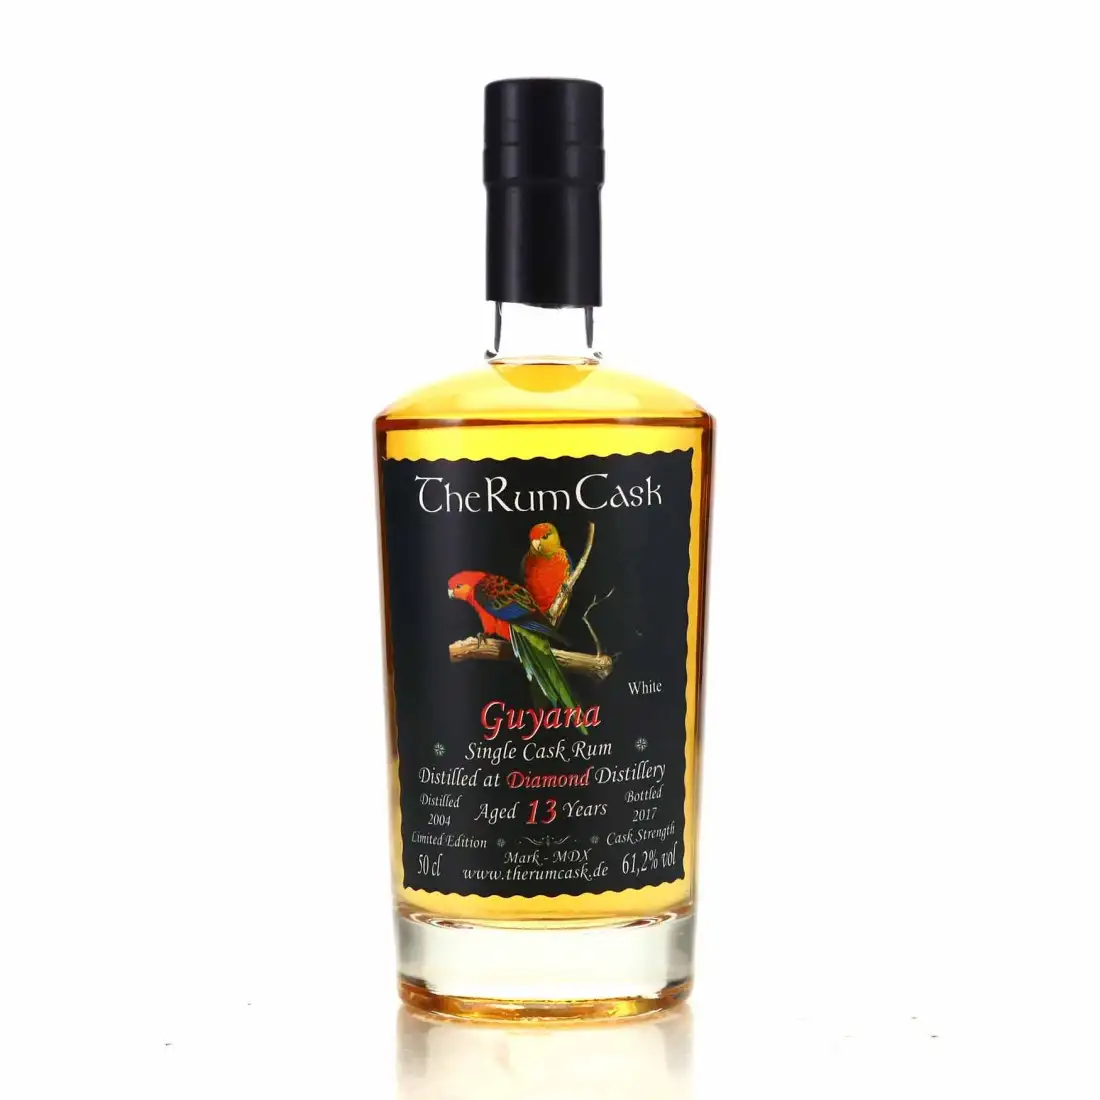 Image of the front of the bottle of the rum Guyana MDX